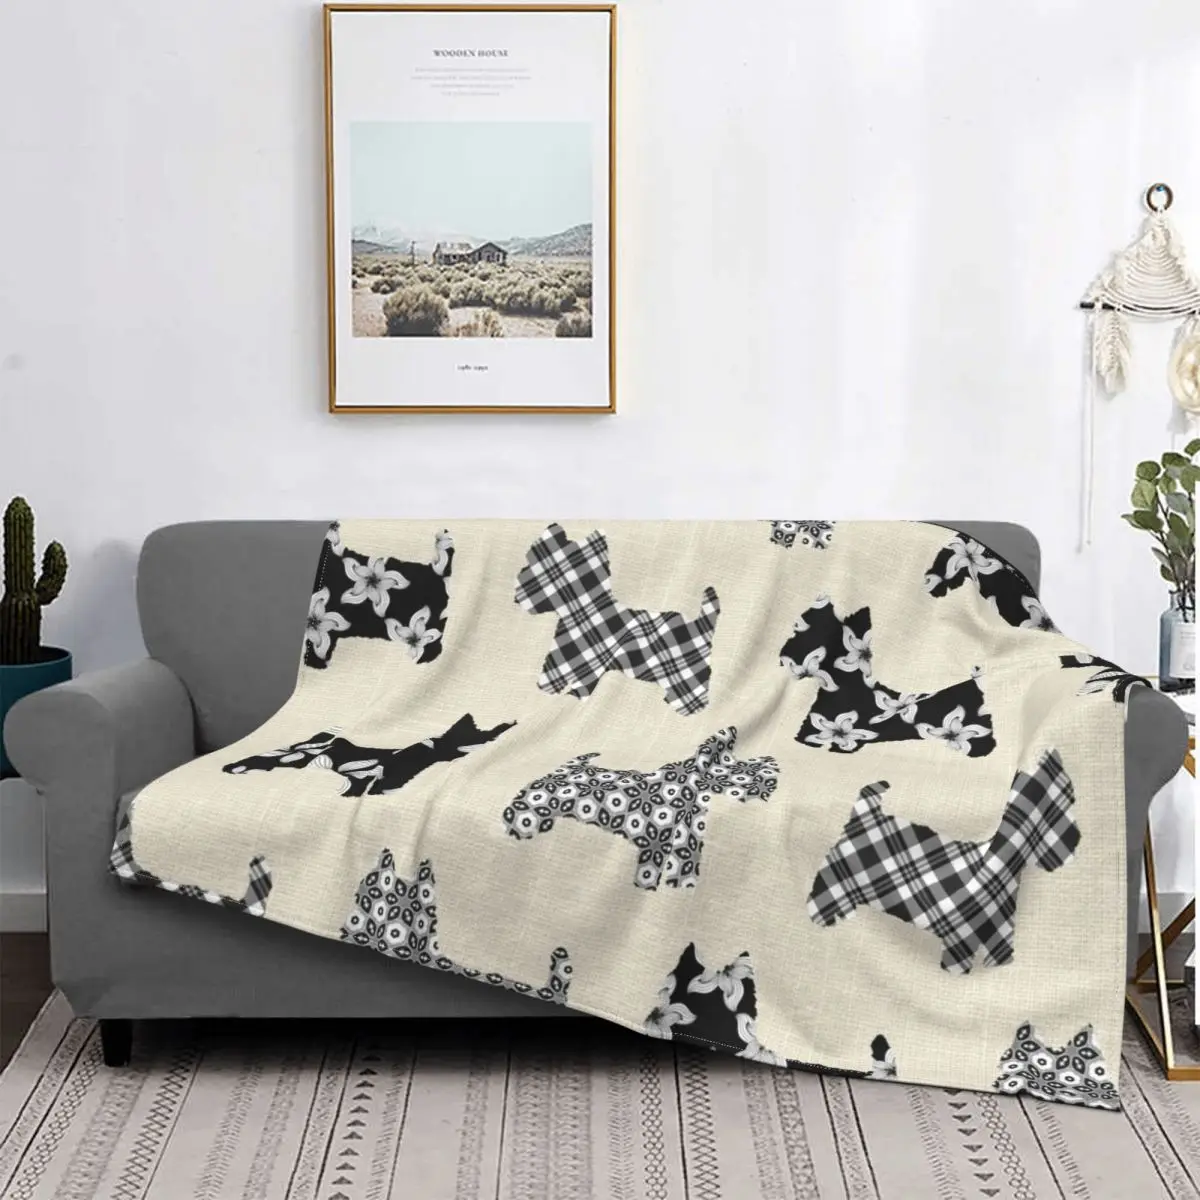 

Westies Blanket Dog Pet Puppy Animal Plush Thick Soft Flannel Fleece Throw Blanket For Bedding Bed Quilt Bedroom Customized